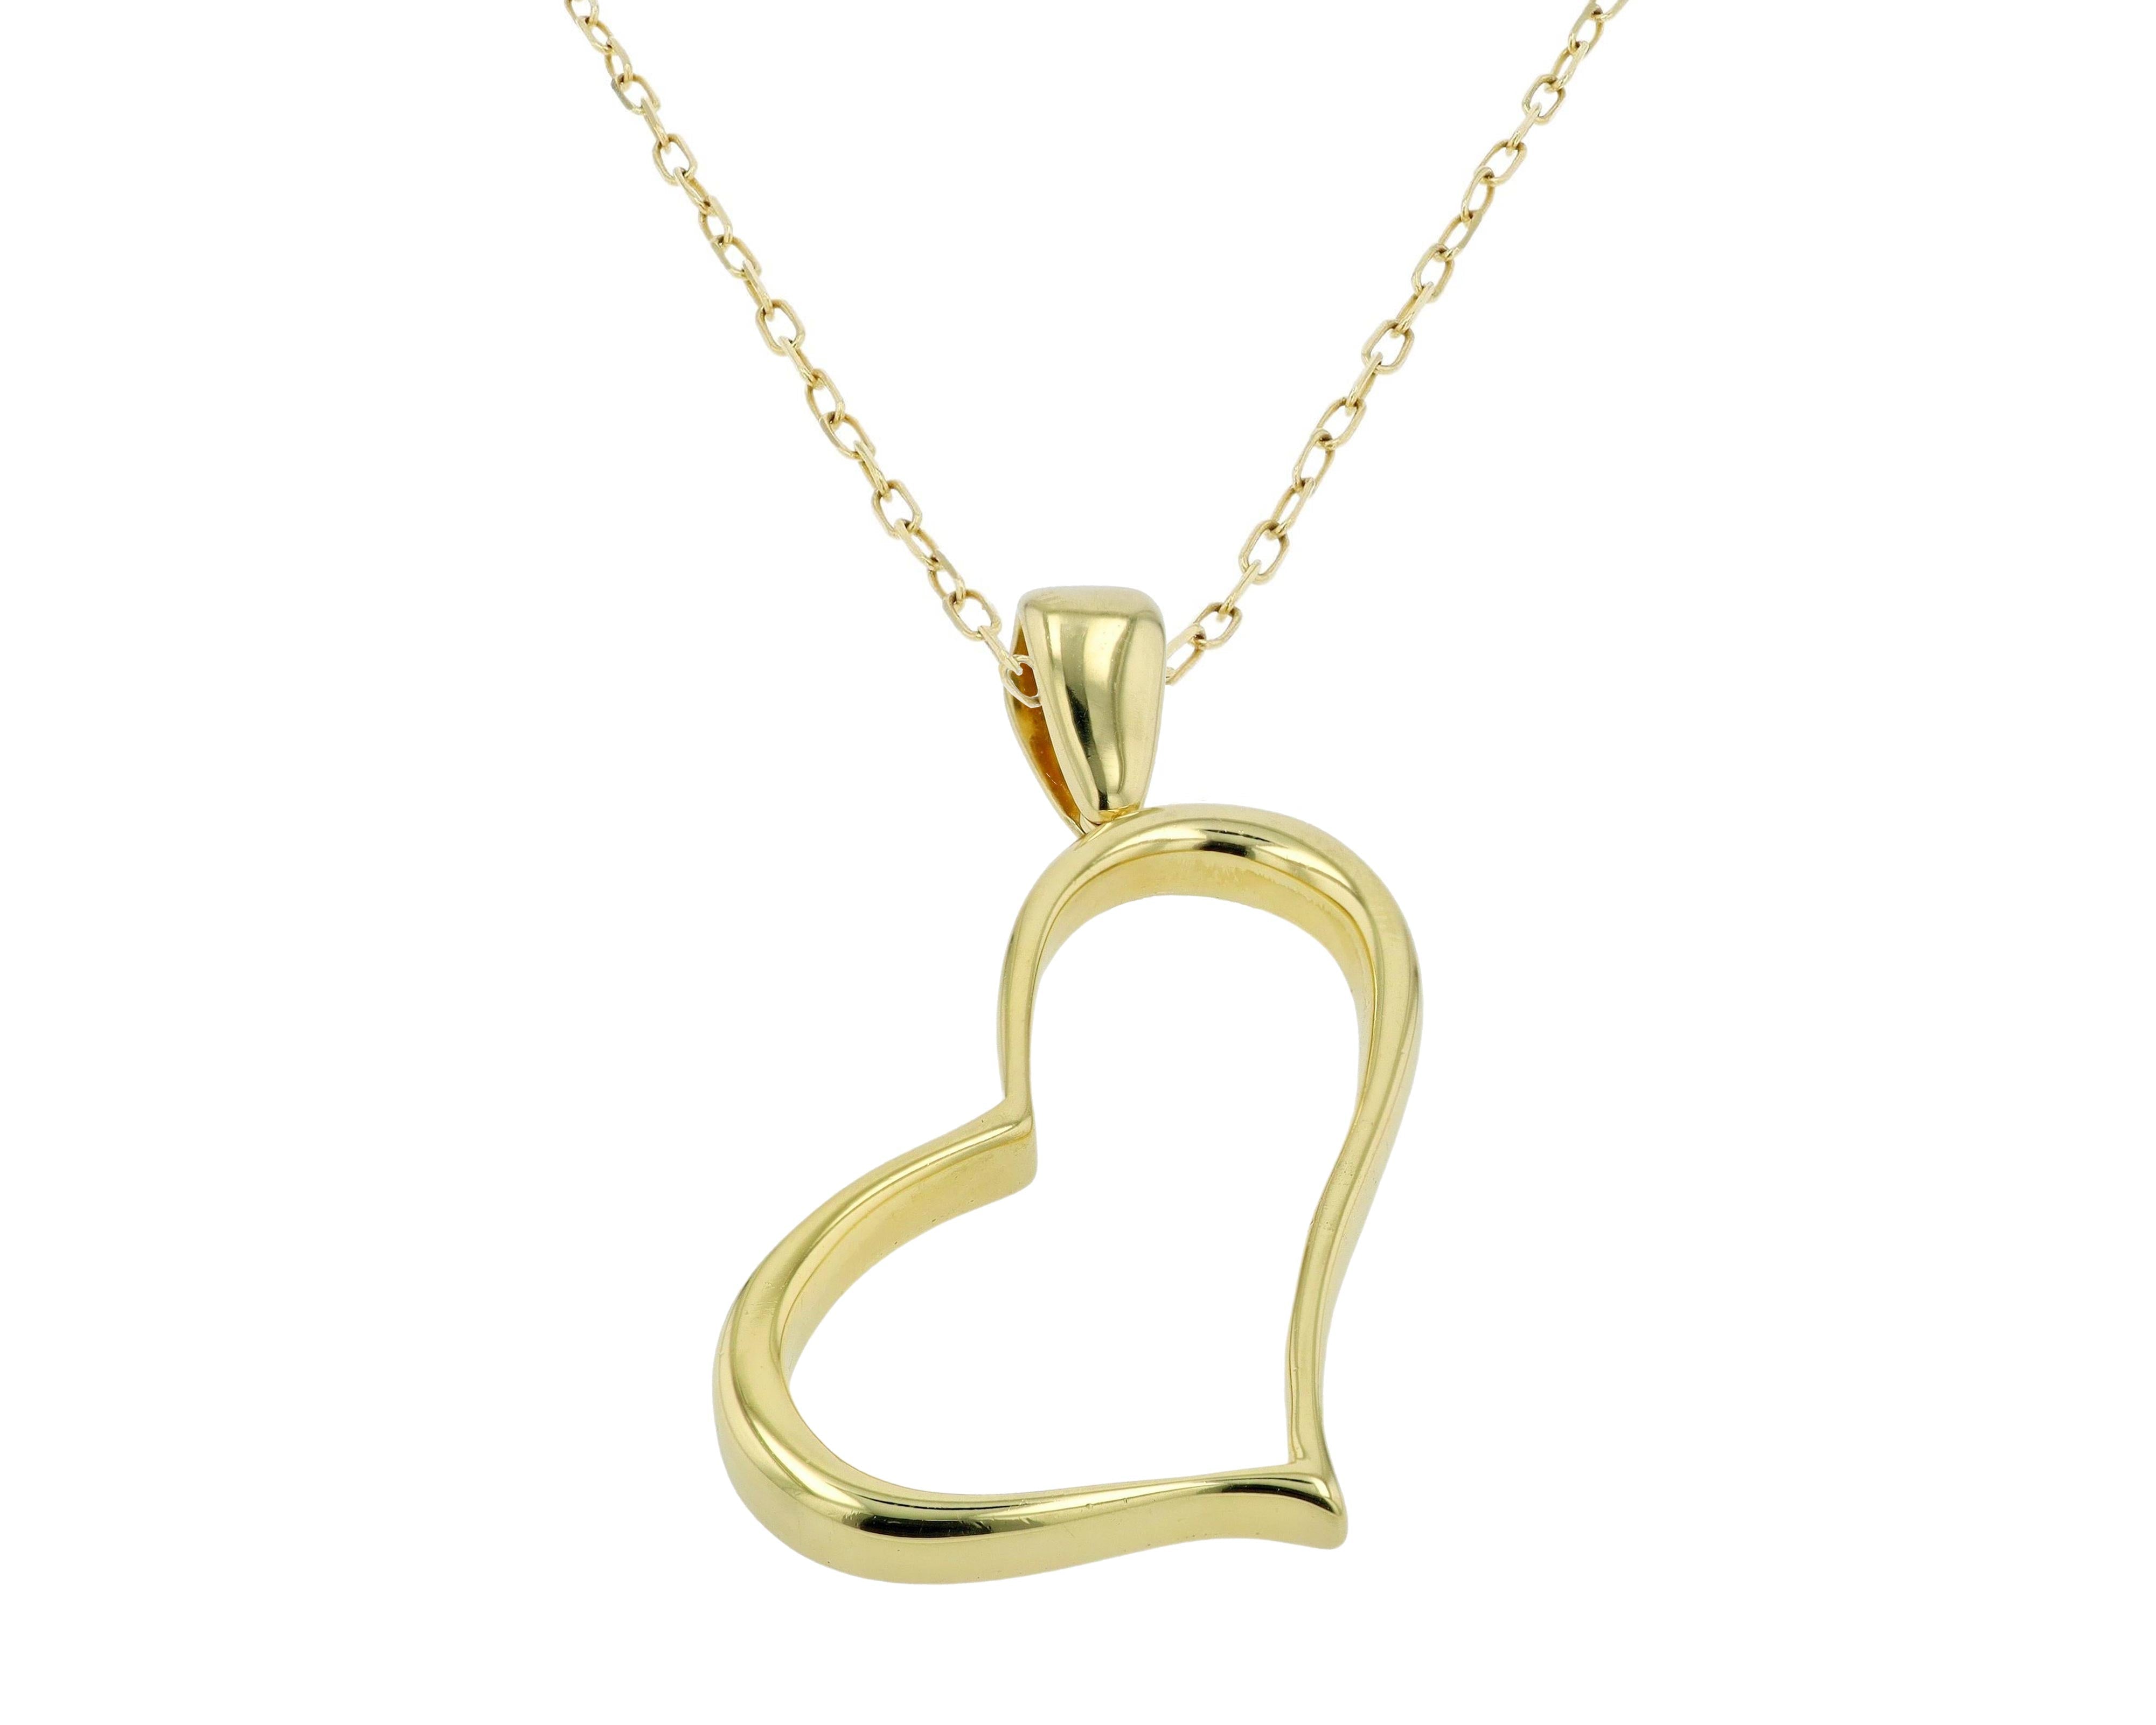 Vintage 1980s 18k Yellow Gold Giant Abstract Heart Pendant